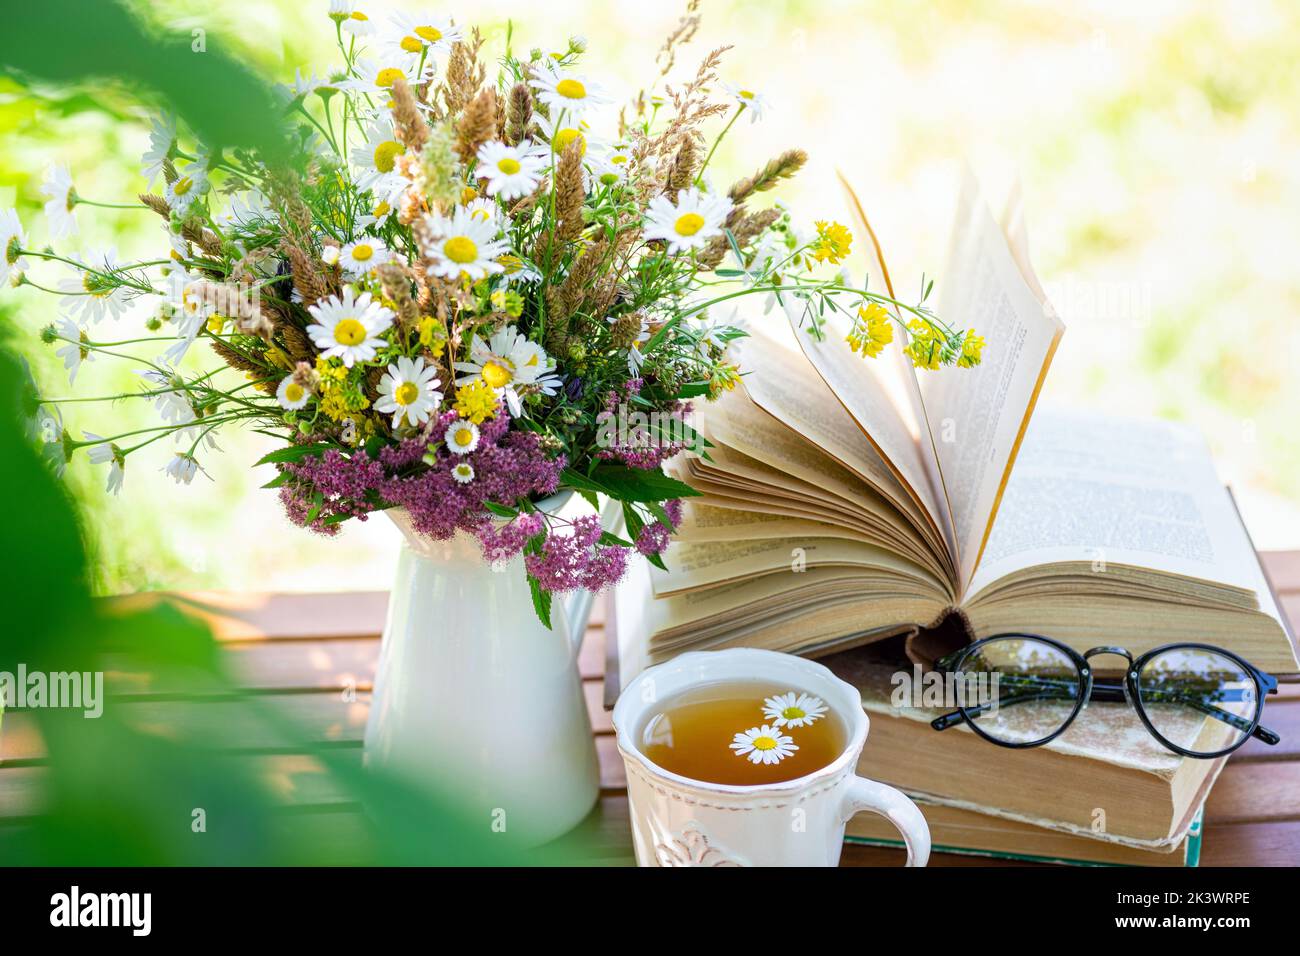 Bouquet of meadow flowers, croissant, cup of tea or coffee, books on table in summer garden. Rest in garden, reading books, breakfast, vacations in na Stock Photo